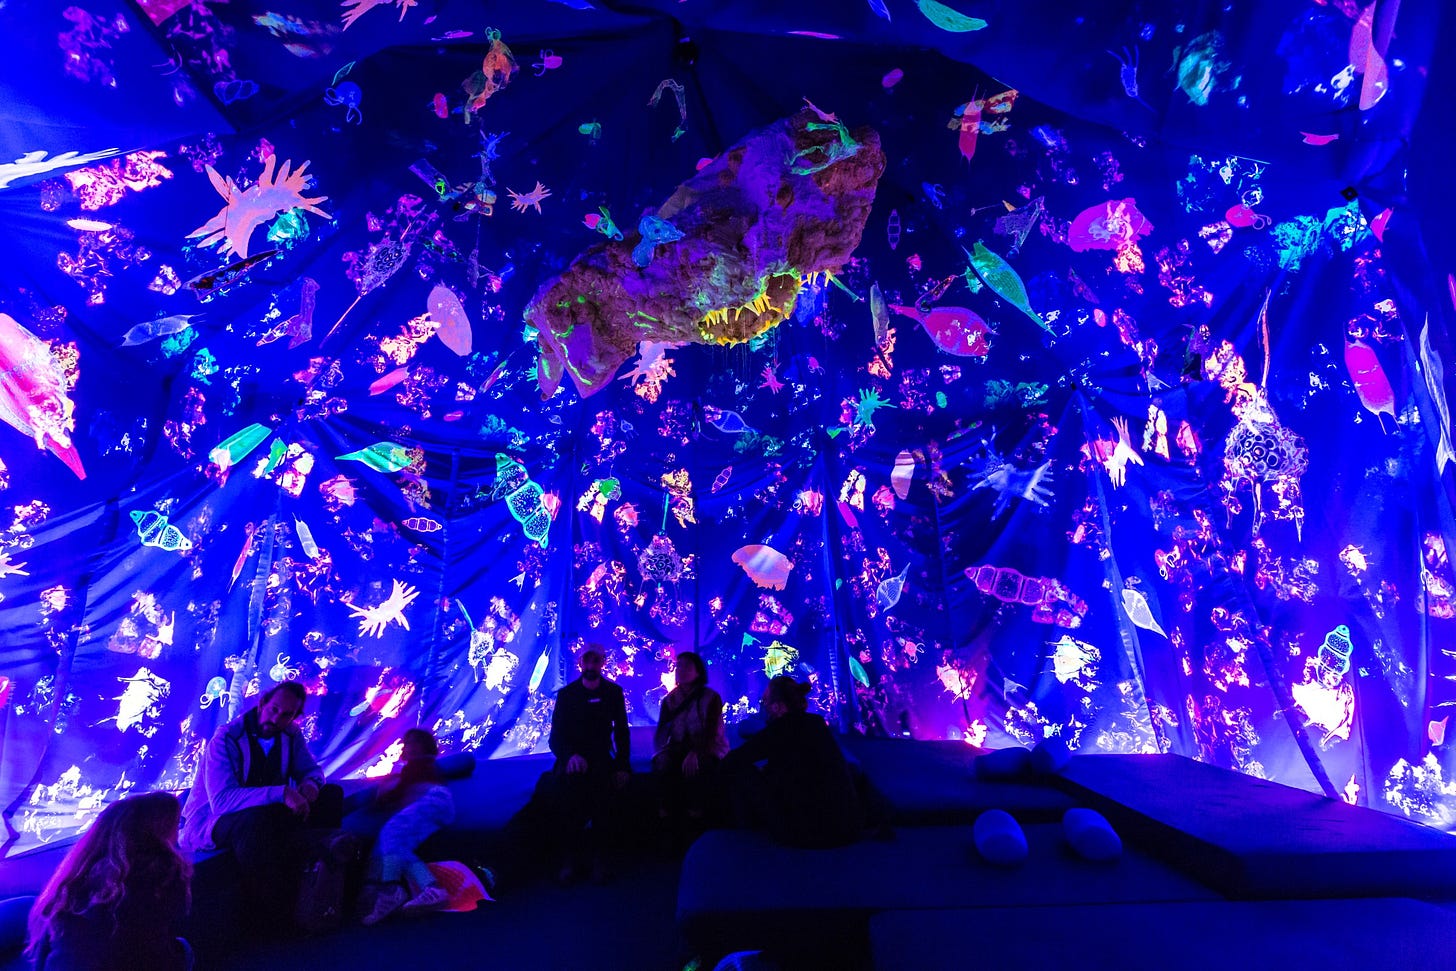 An installation view showing people sitting in a kind of dark blue tent. A fluorescent sea creature hangs from the ceiling. In addition, the fabric of the tent is printed with colourful, fluorescent sea creatures.